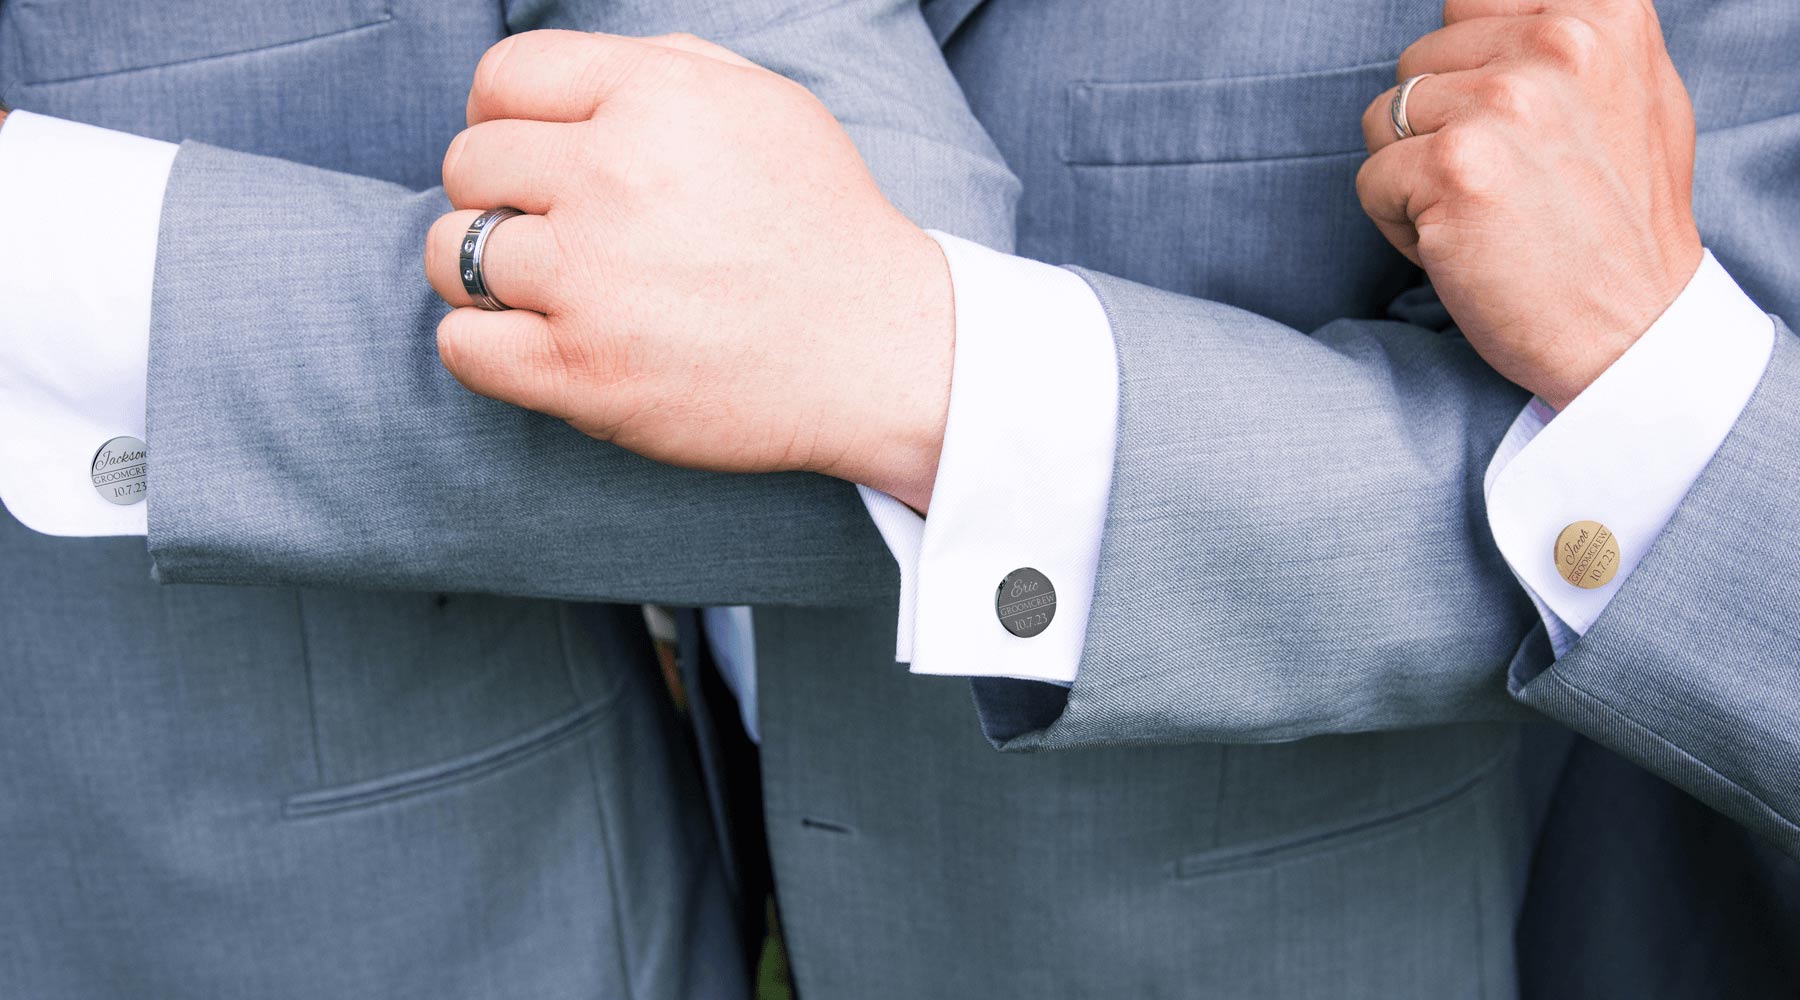 Personalized Gifts for the Groom and Groomsmen